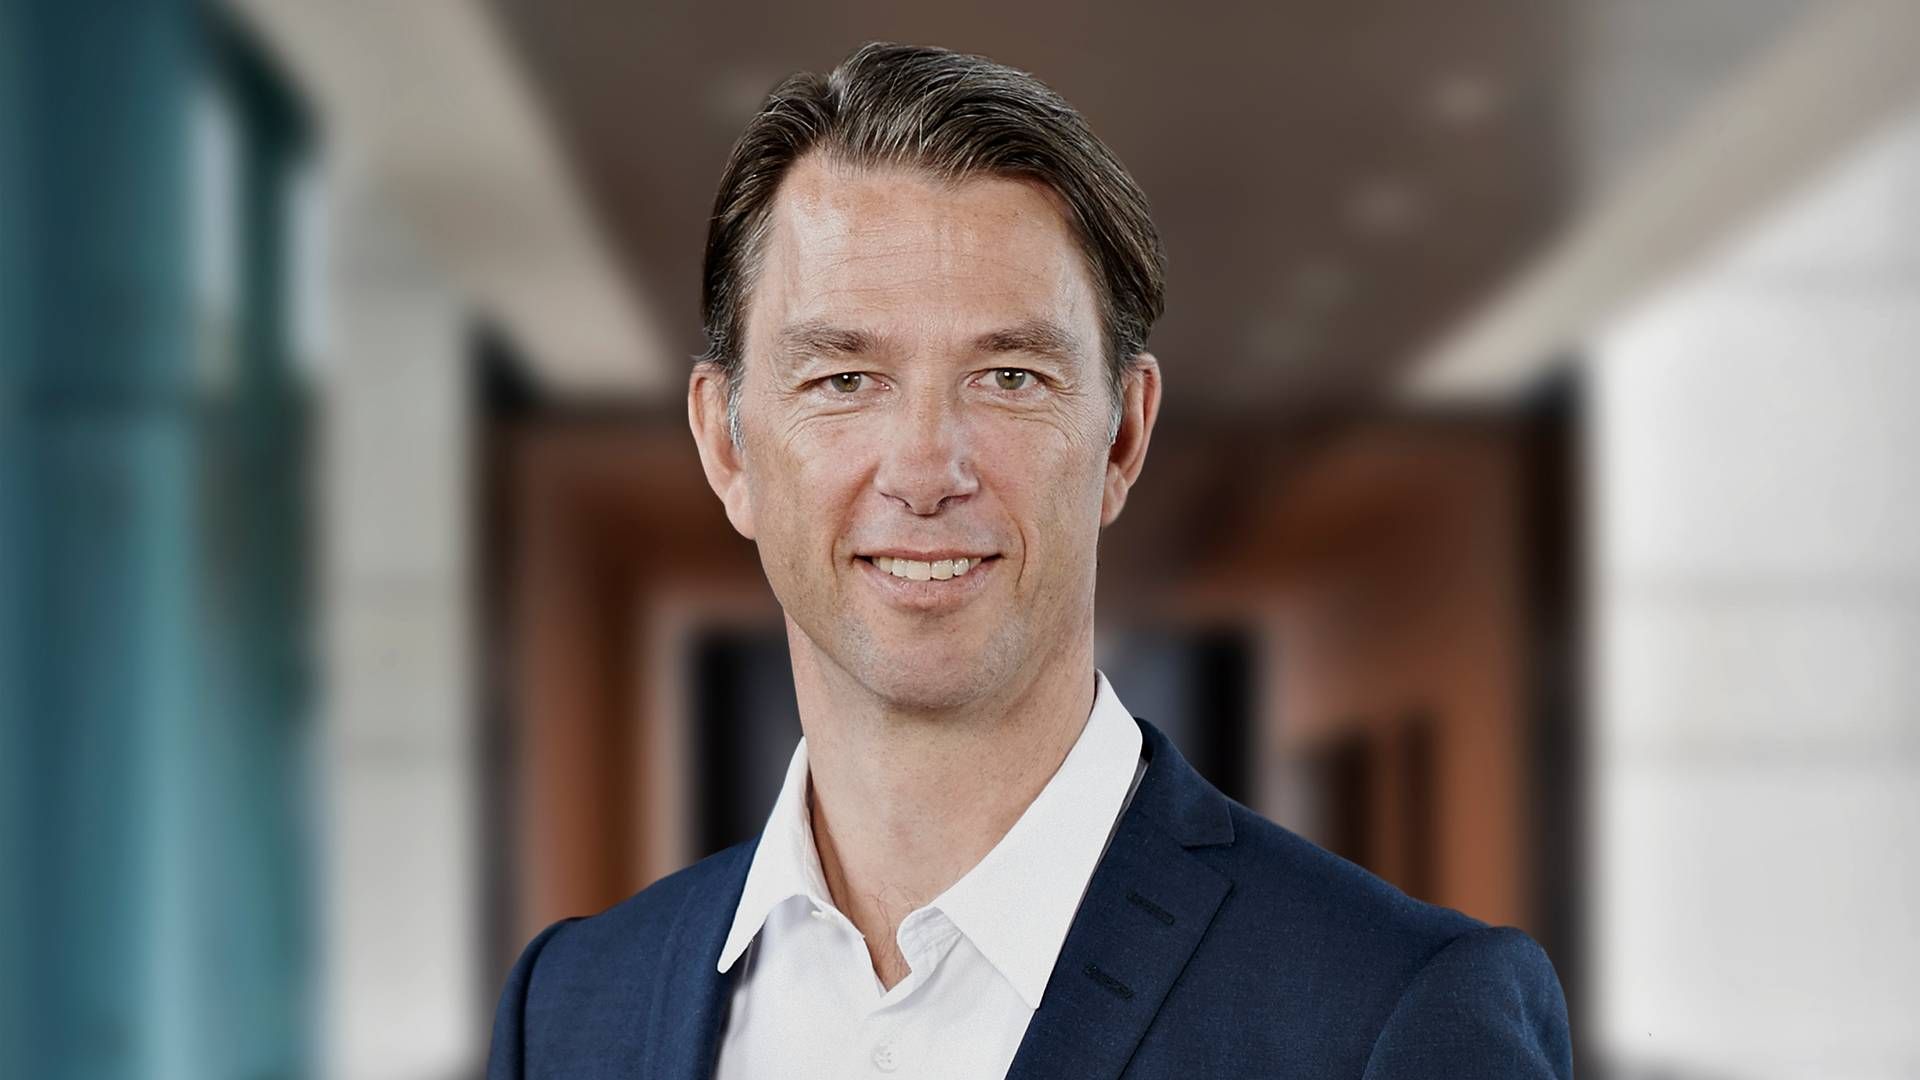 "The stories that have appeared in the press suggest that there are aspects that have not been fully uncovered," says Eric Pedersen, head of responsible investments at Nordea Asset Management. | Photo: Nordea Pressefoto